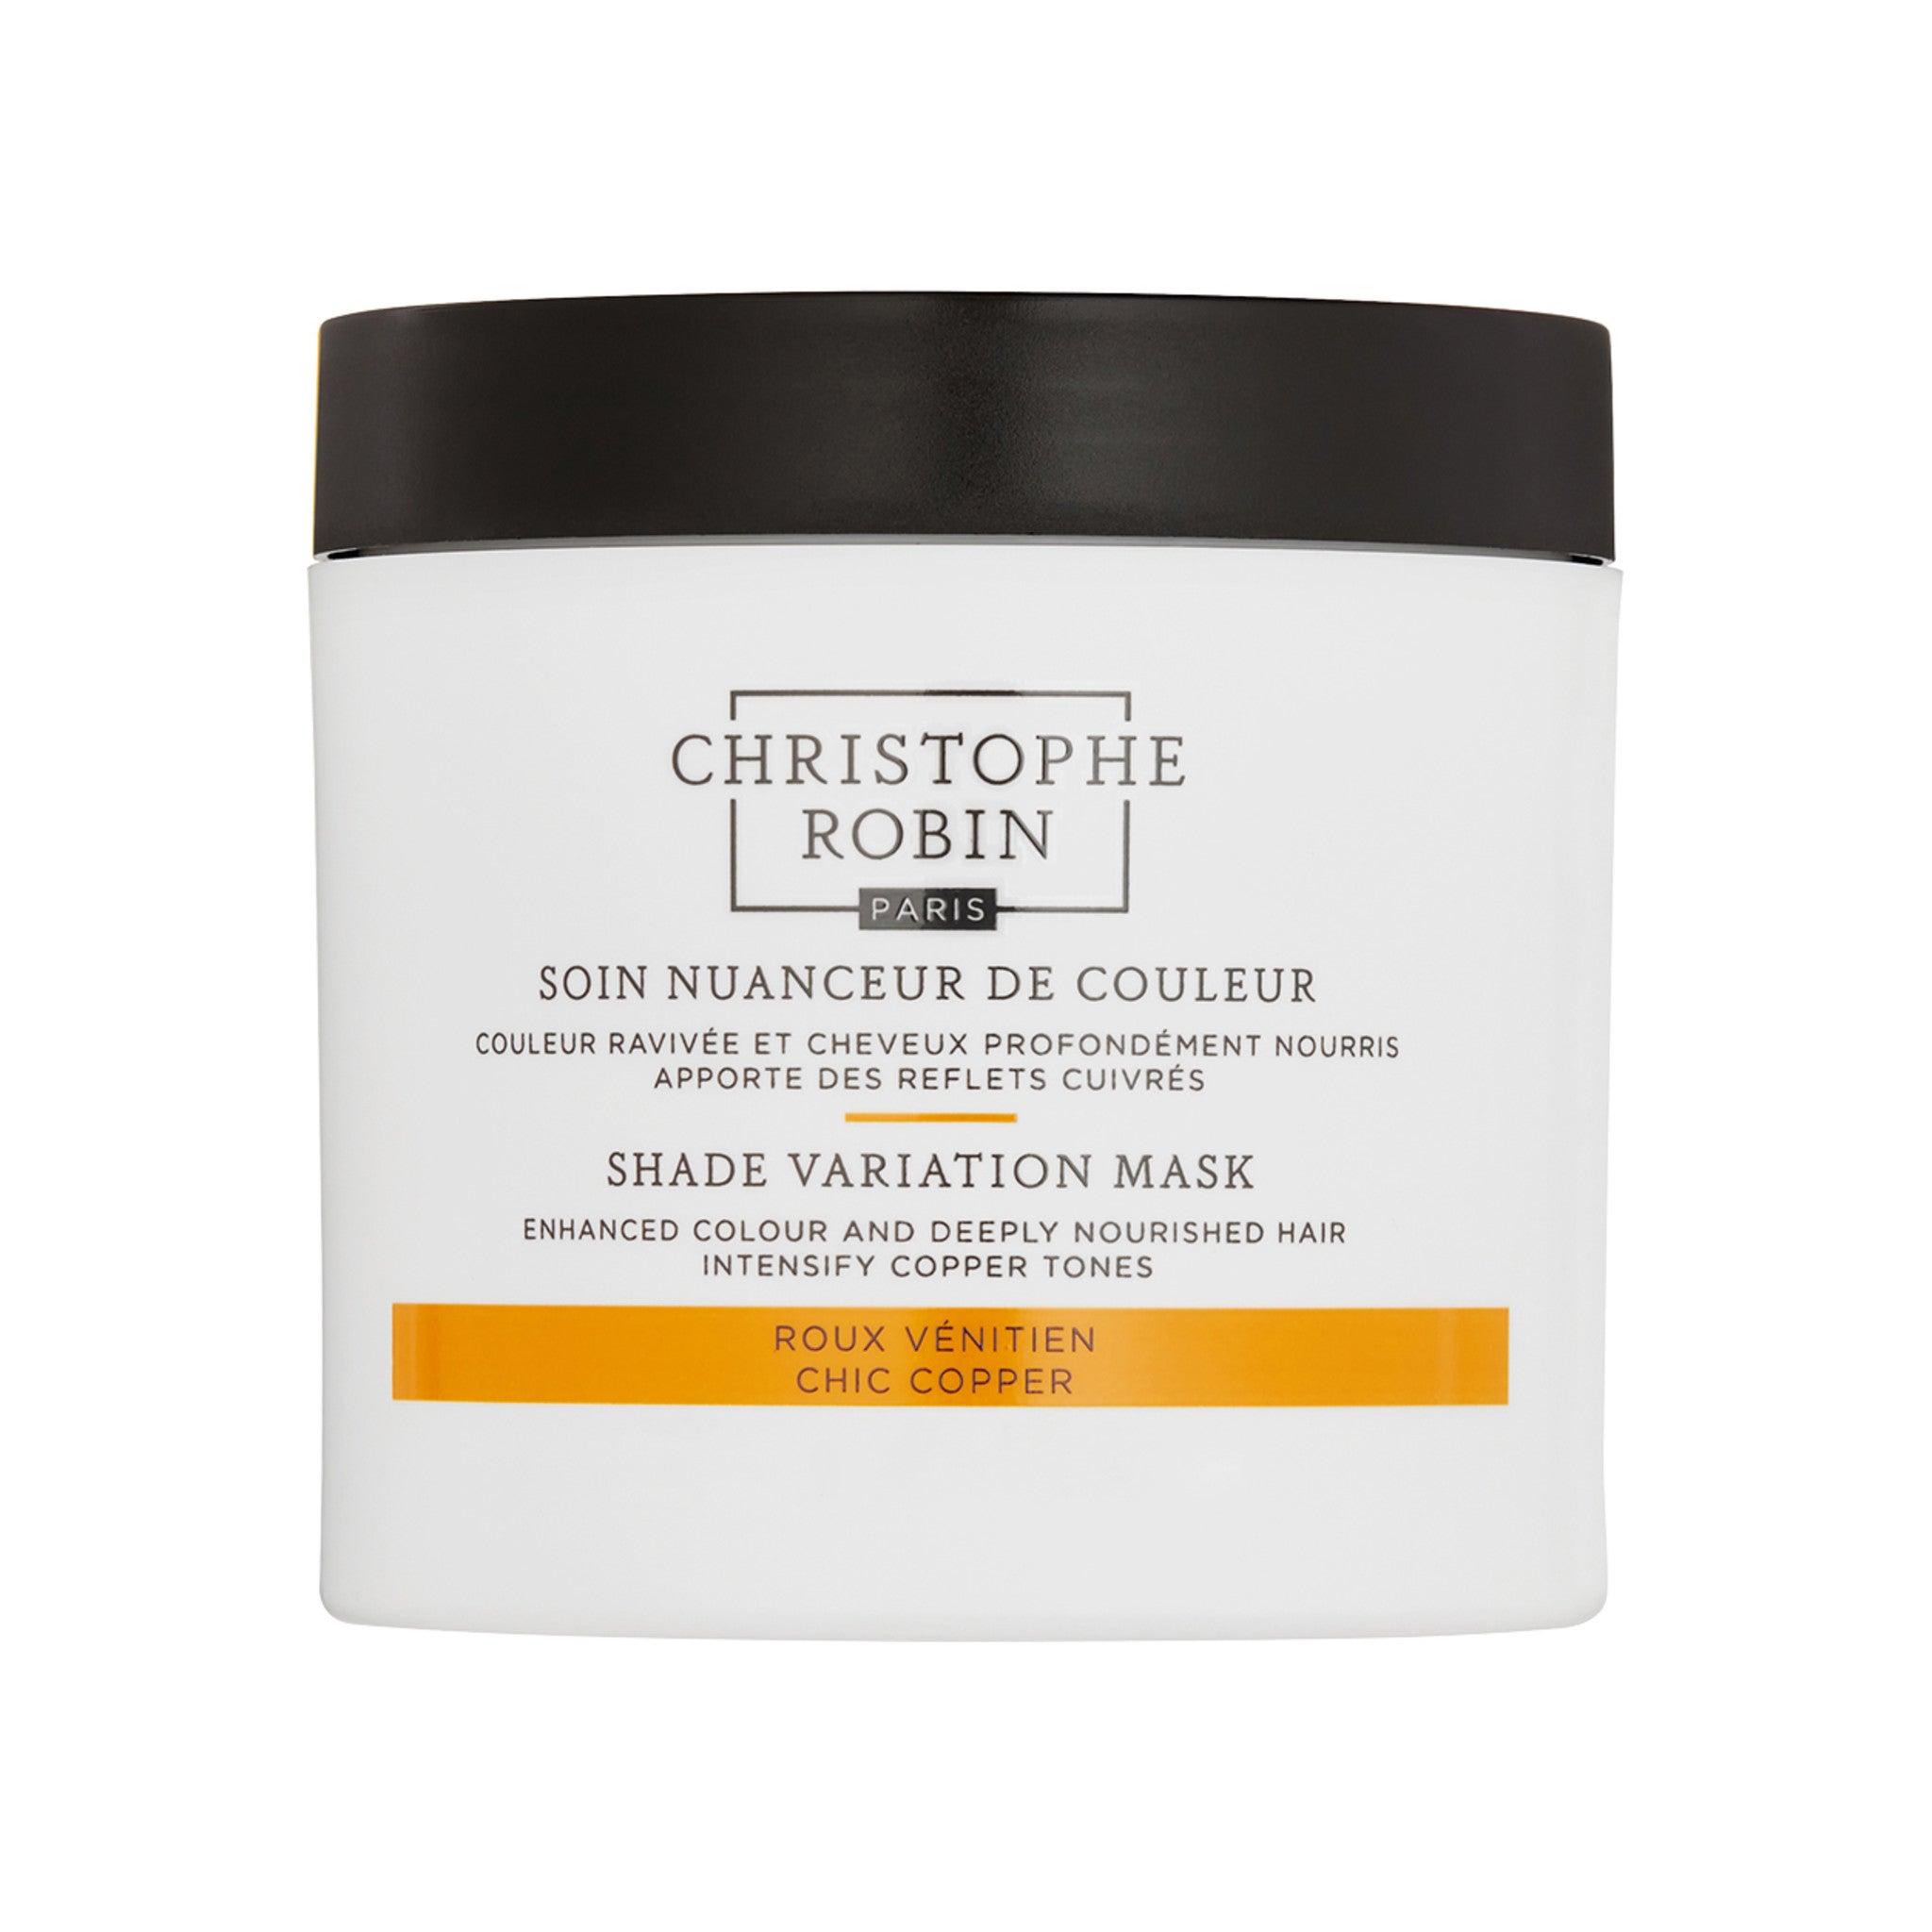 Christophe Robin Shade Variation Mask Chic Copper main image. This product is for red hair